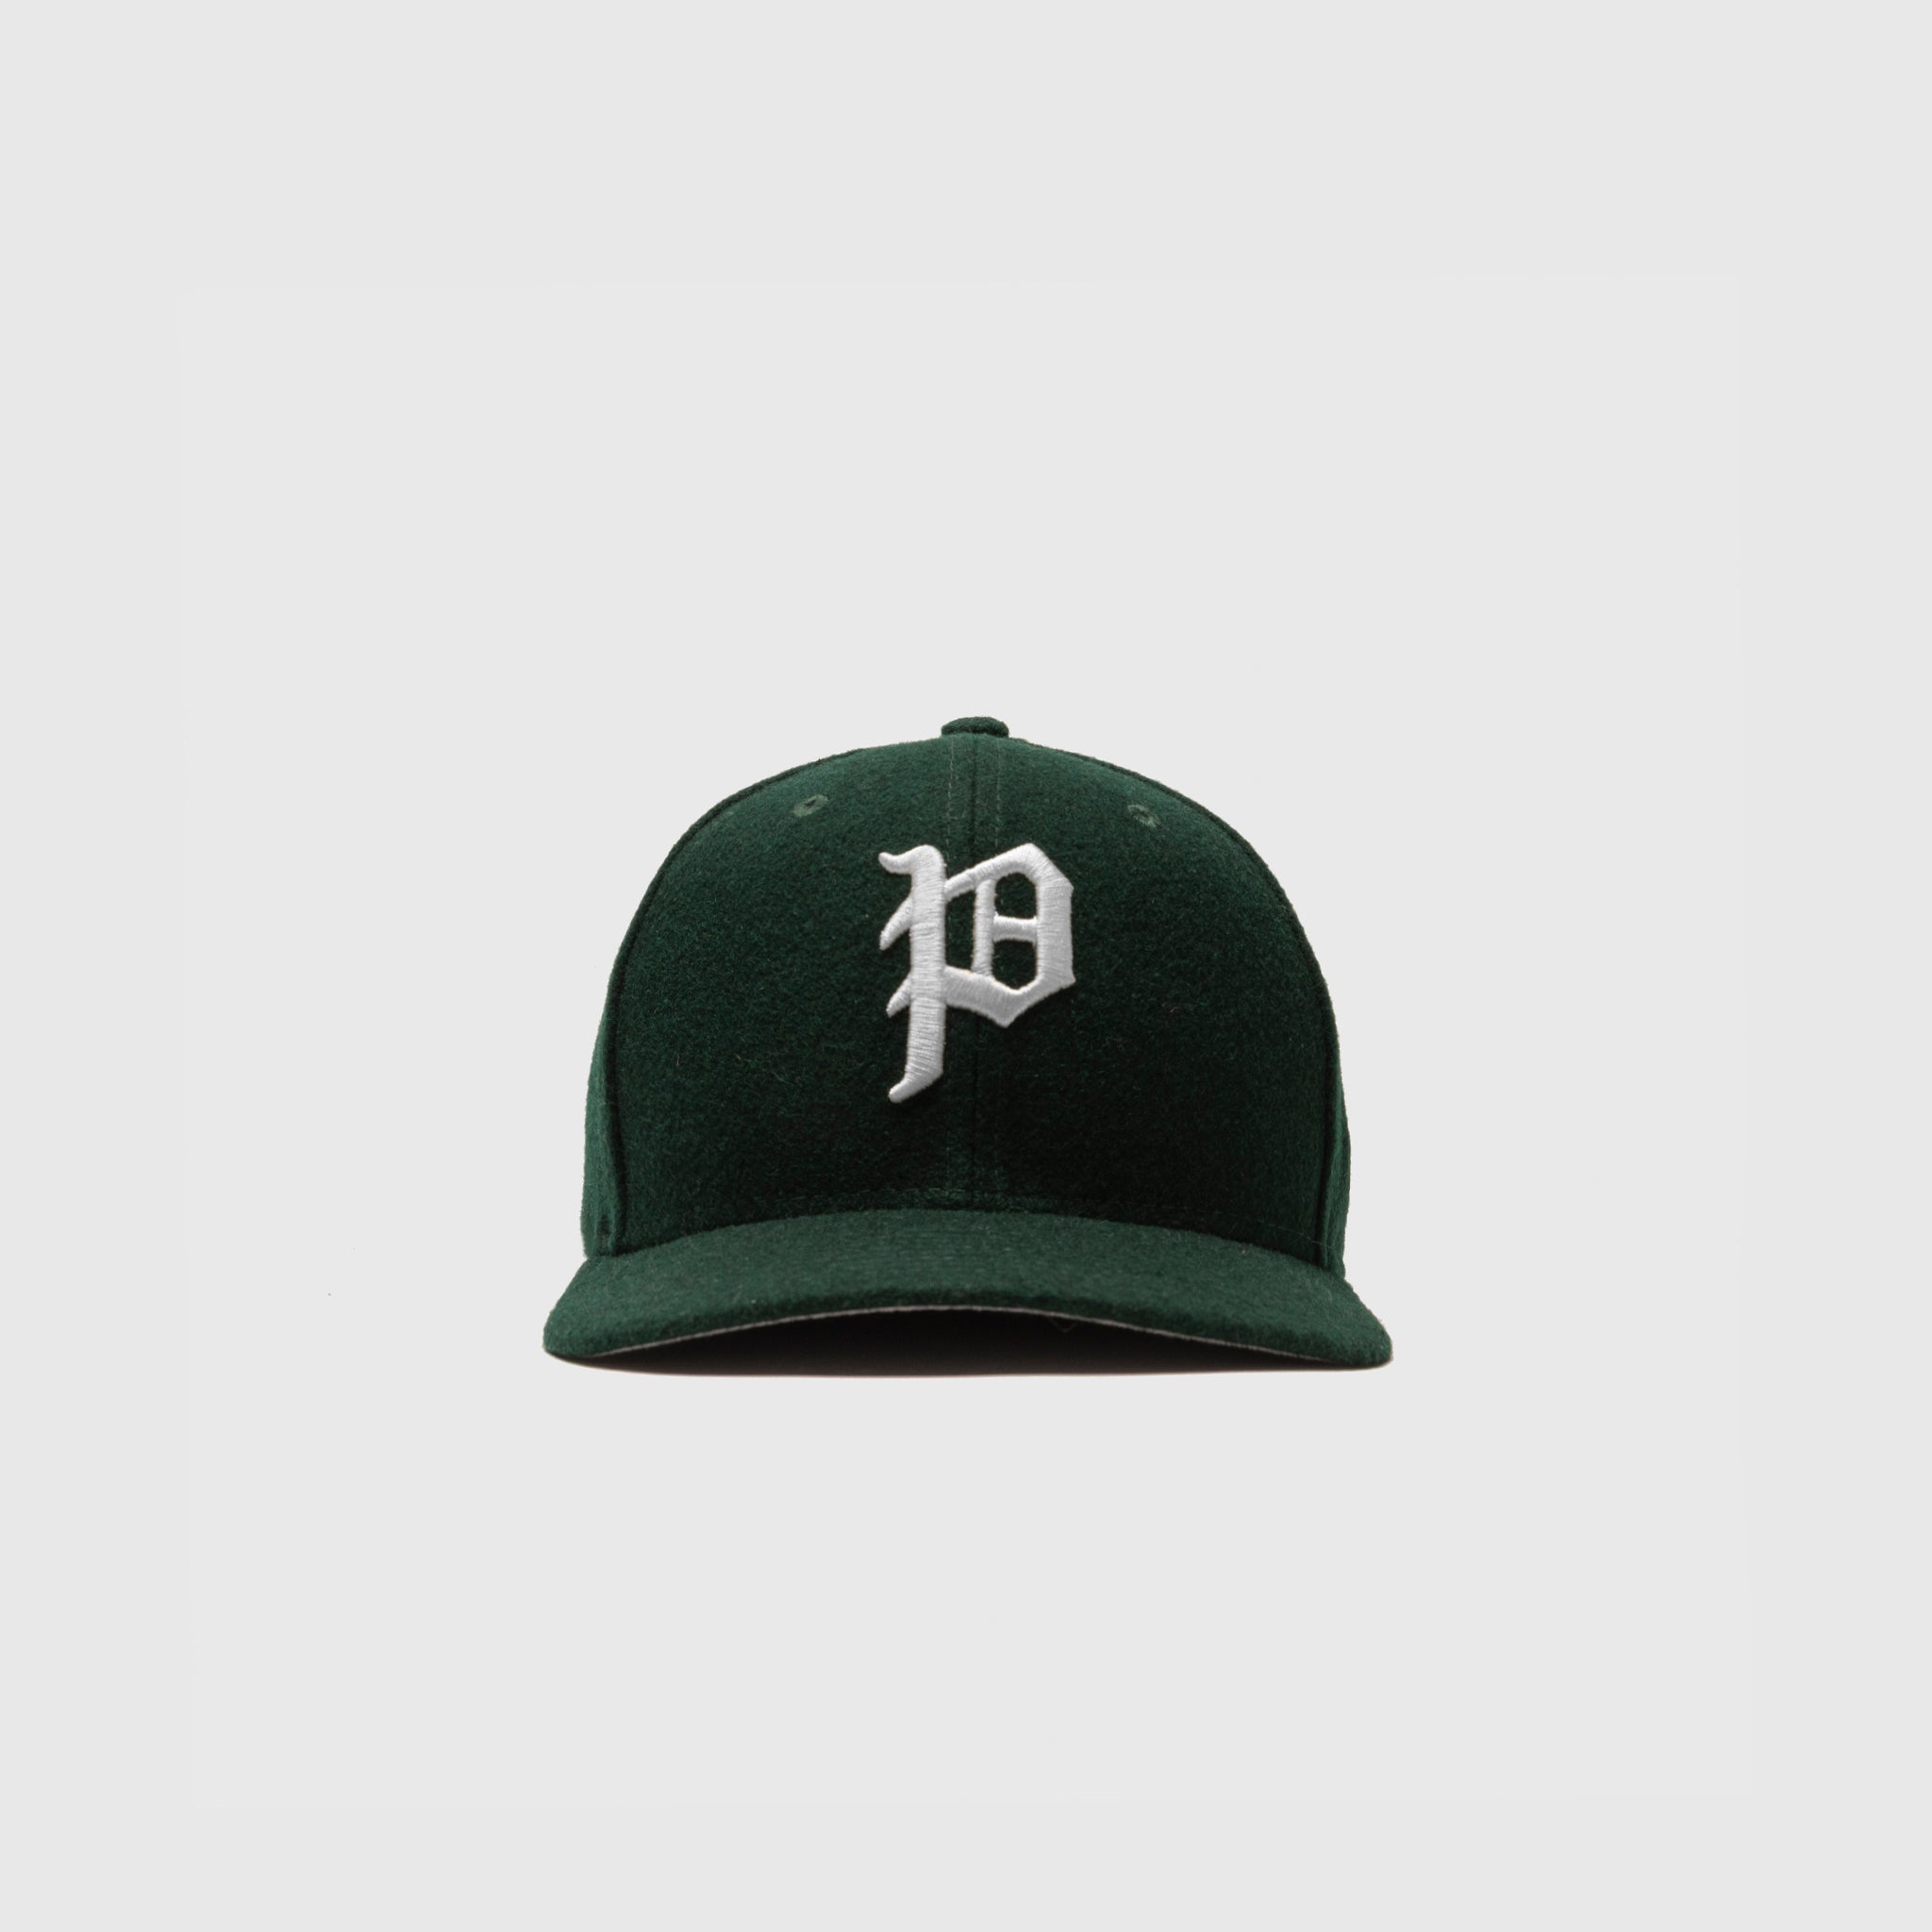 AnthonyantonellisShops X NEW ERA  59FIFTY FITTED "FOREST GREEN"